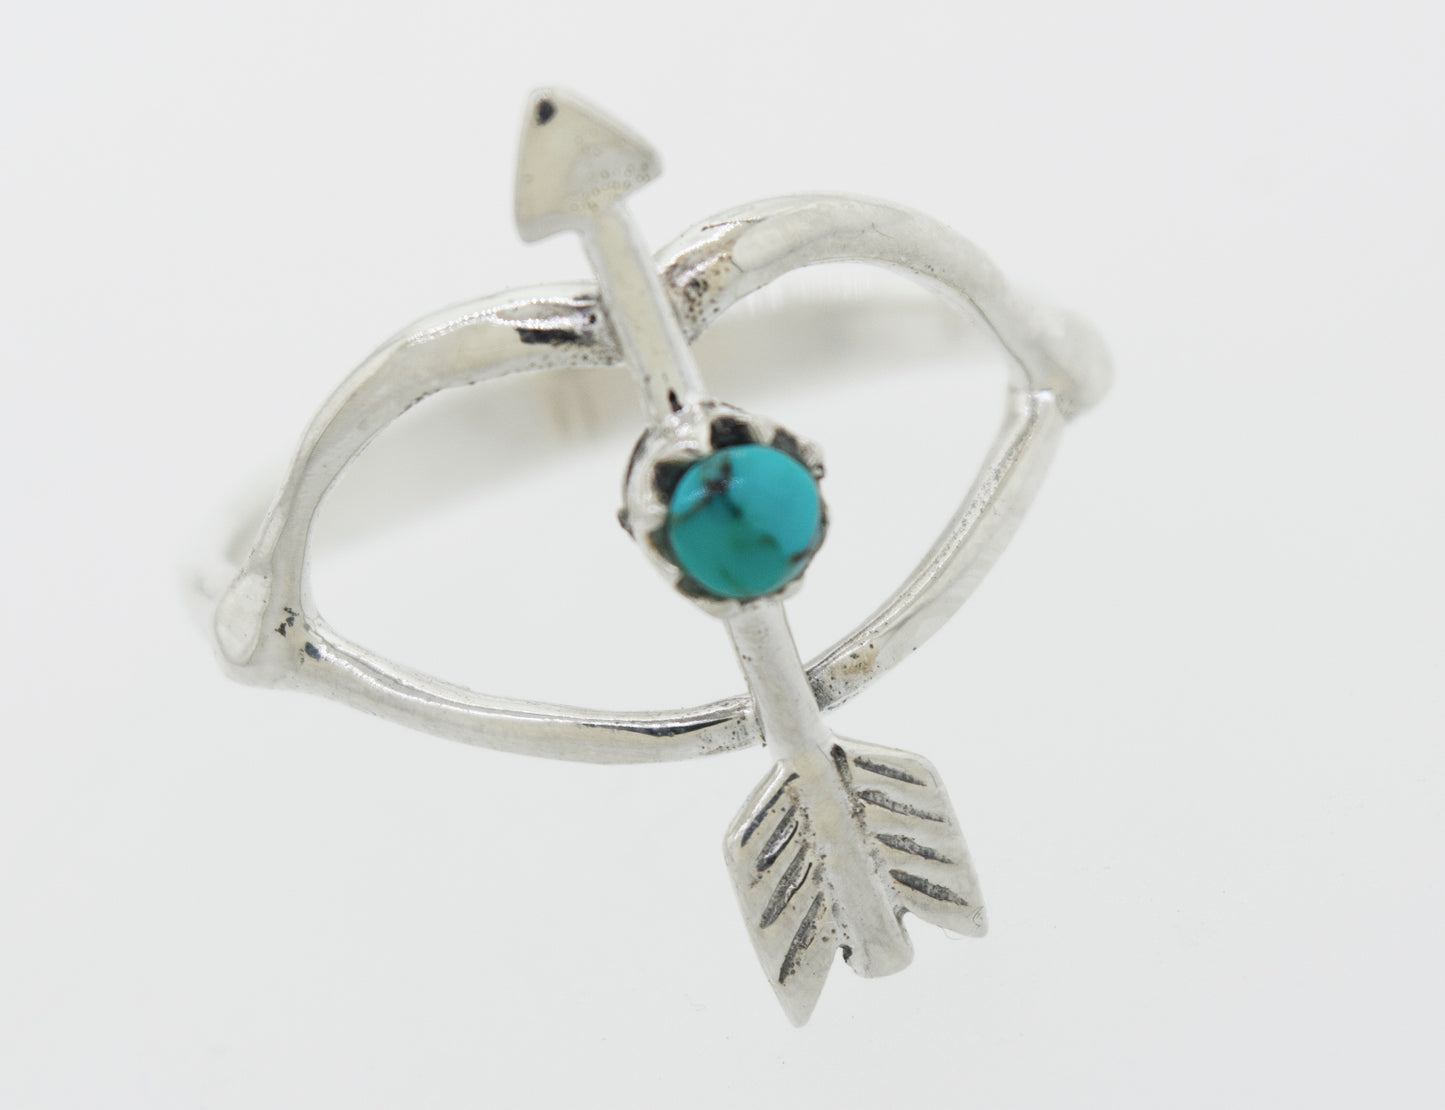 A Super Silver Turquoise Stone Ring With Bow And Arrow Design.